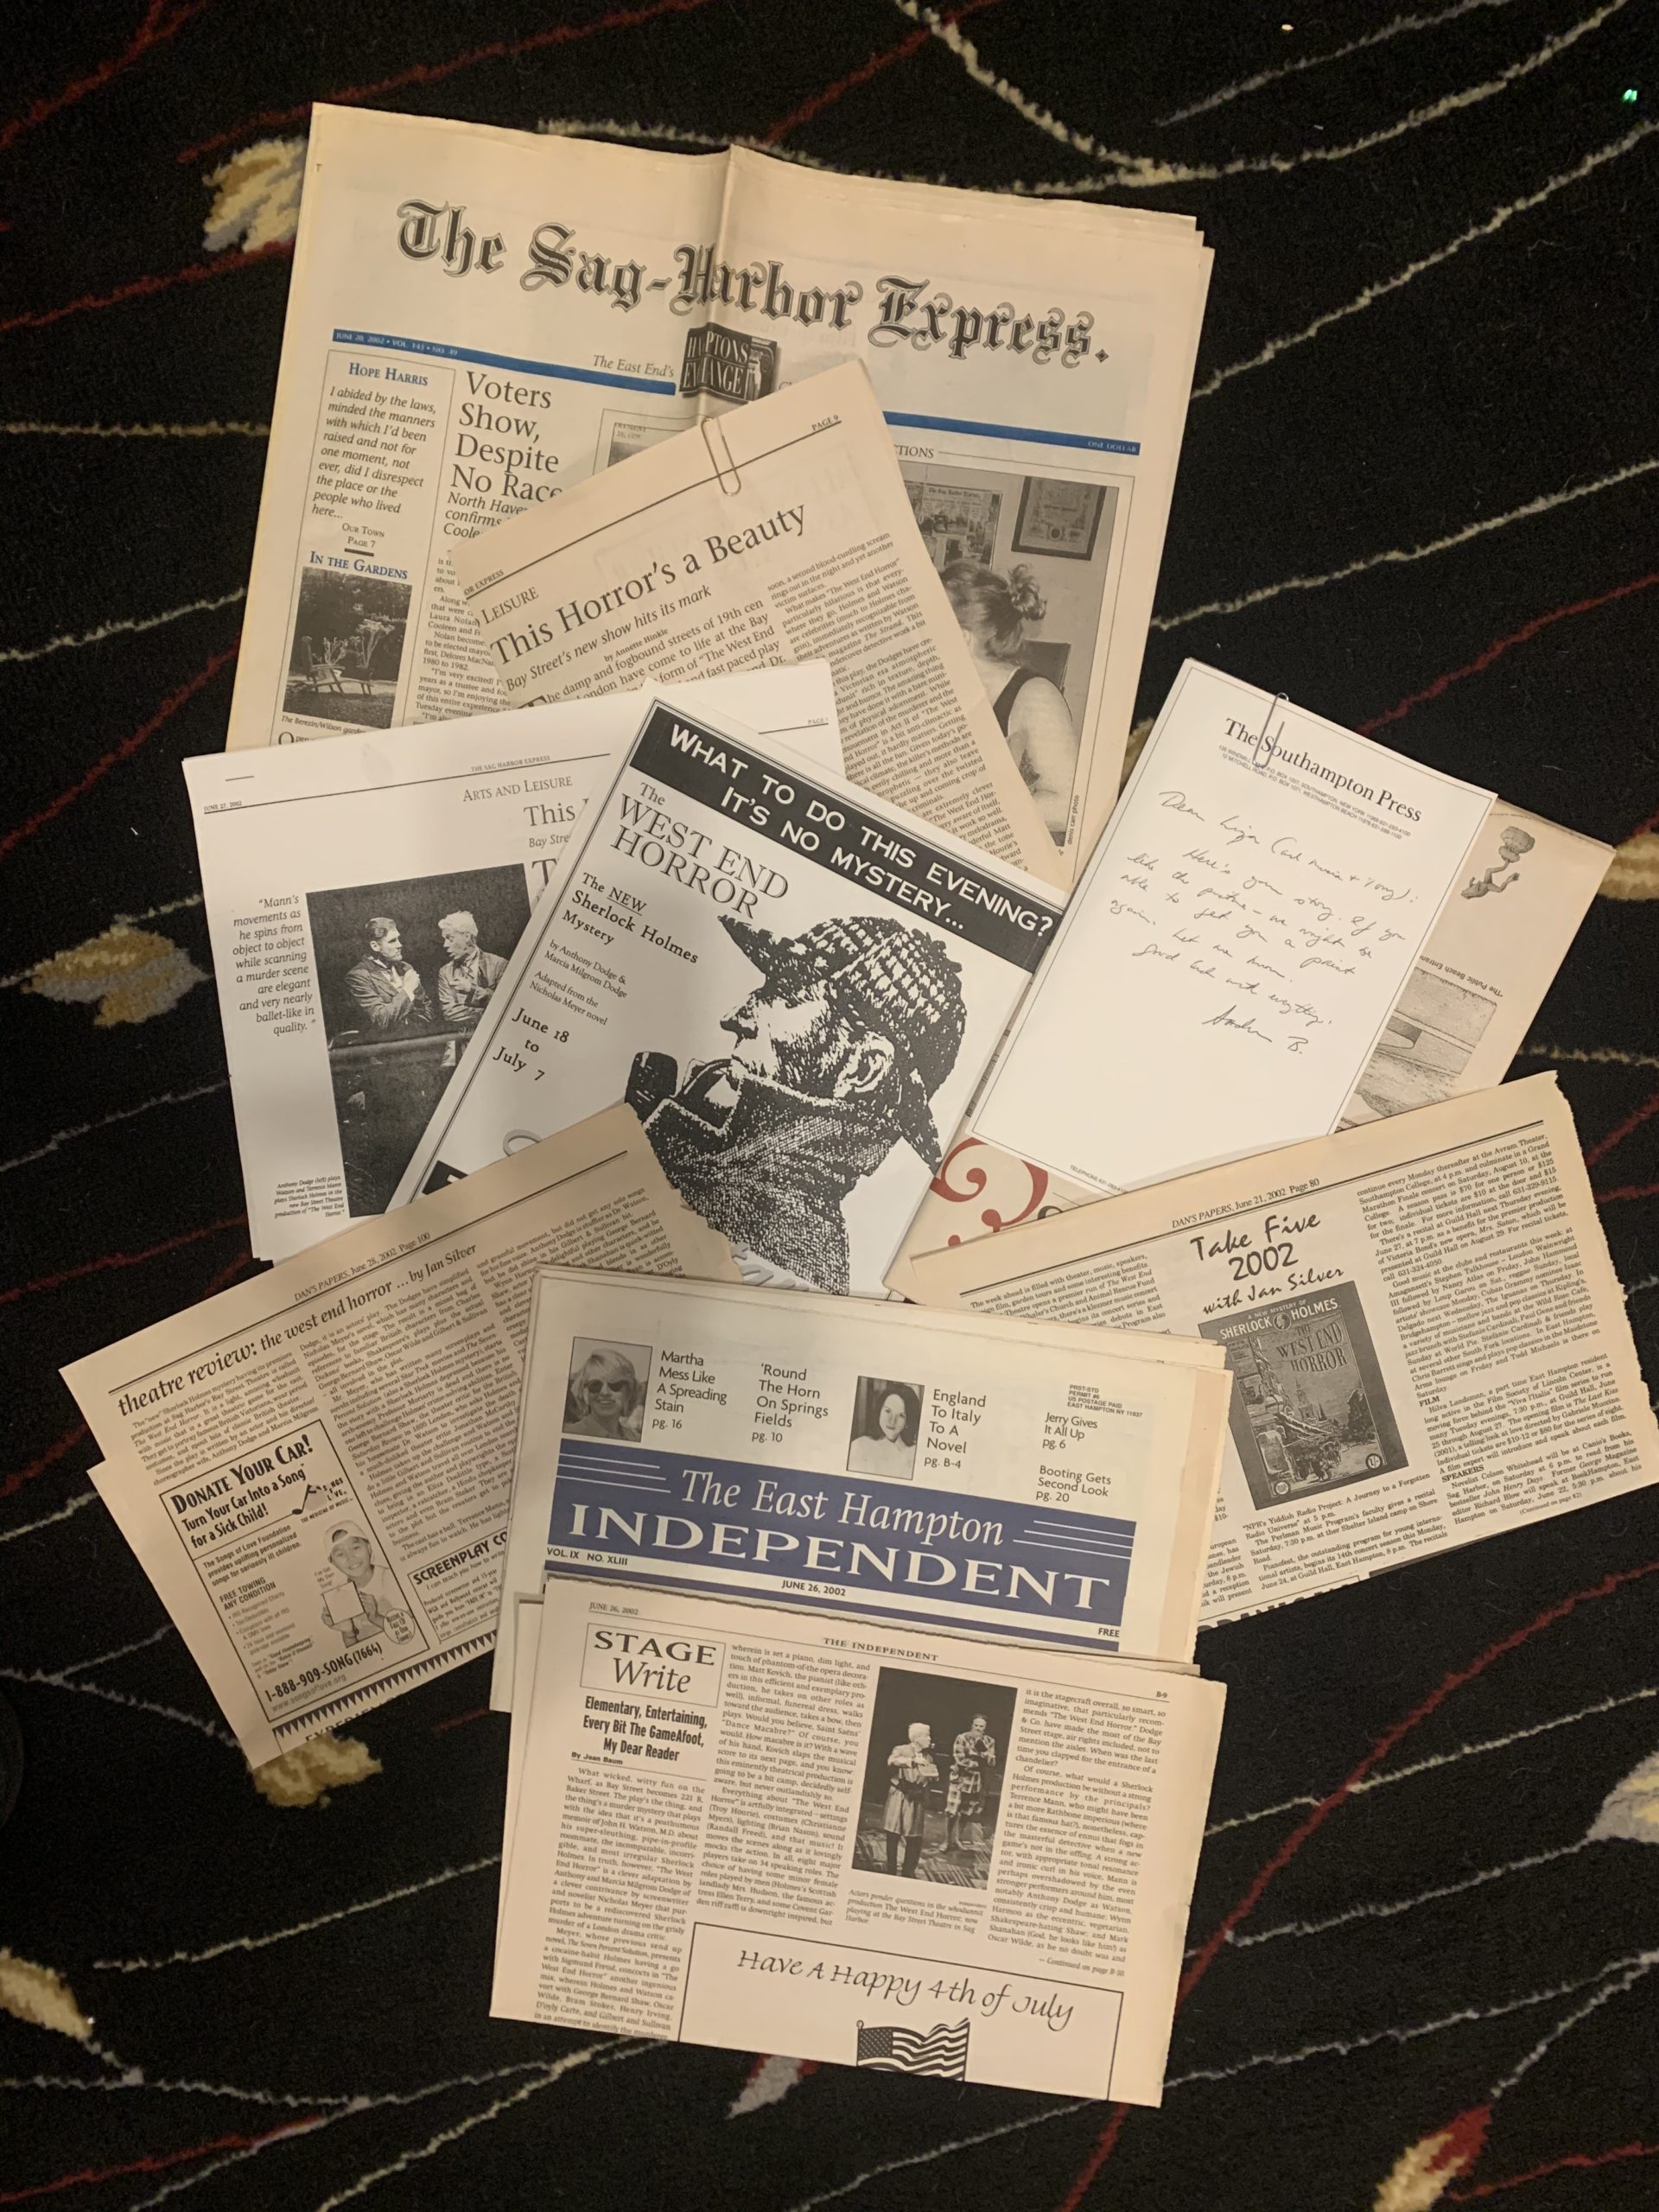 Some of Marcia Milgrom Dodge's boxes and ephemera from the productions she directed at Bay Street Theater.